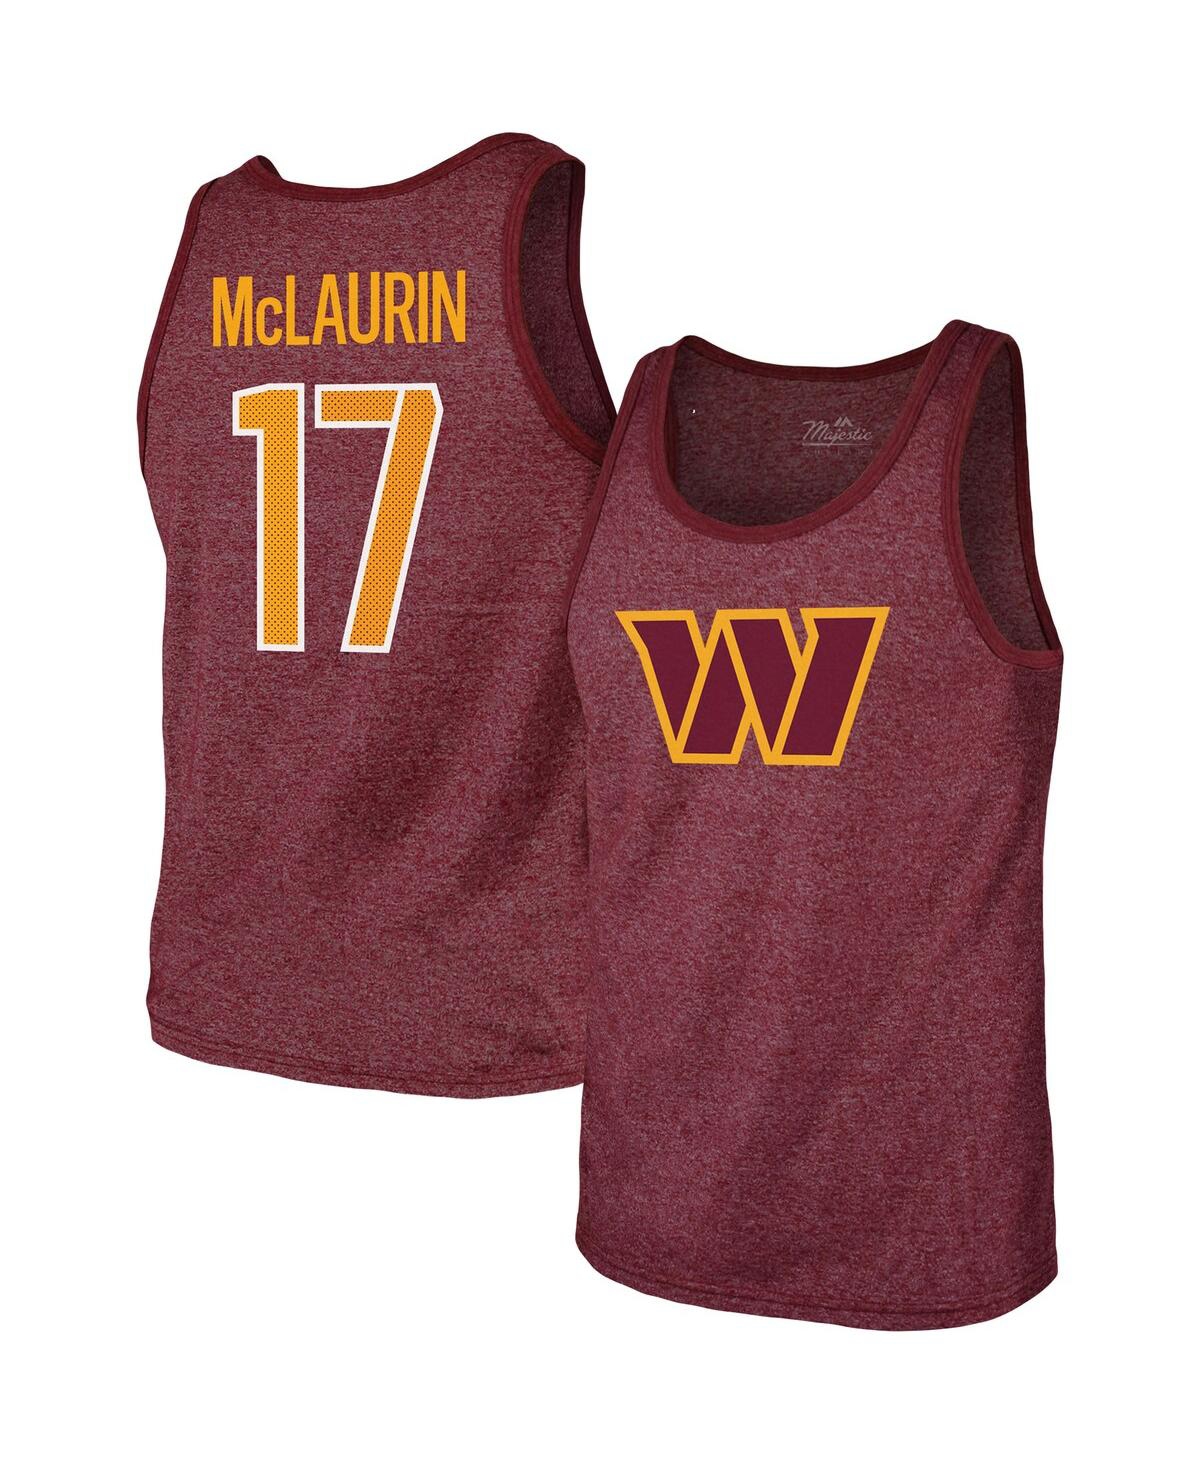 Men's Majestic Threads Terry McLaurin Heathered Burgundy Washington Commanders Player Name & Number Tank Top - Burgundy